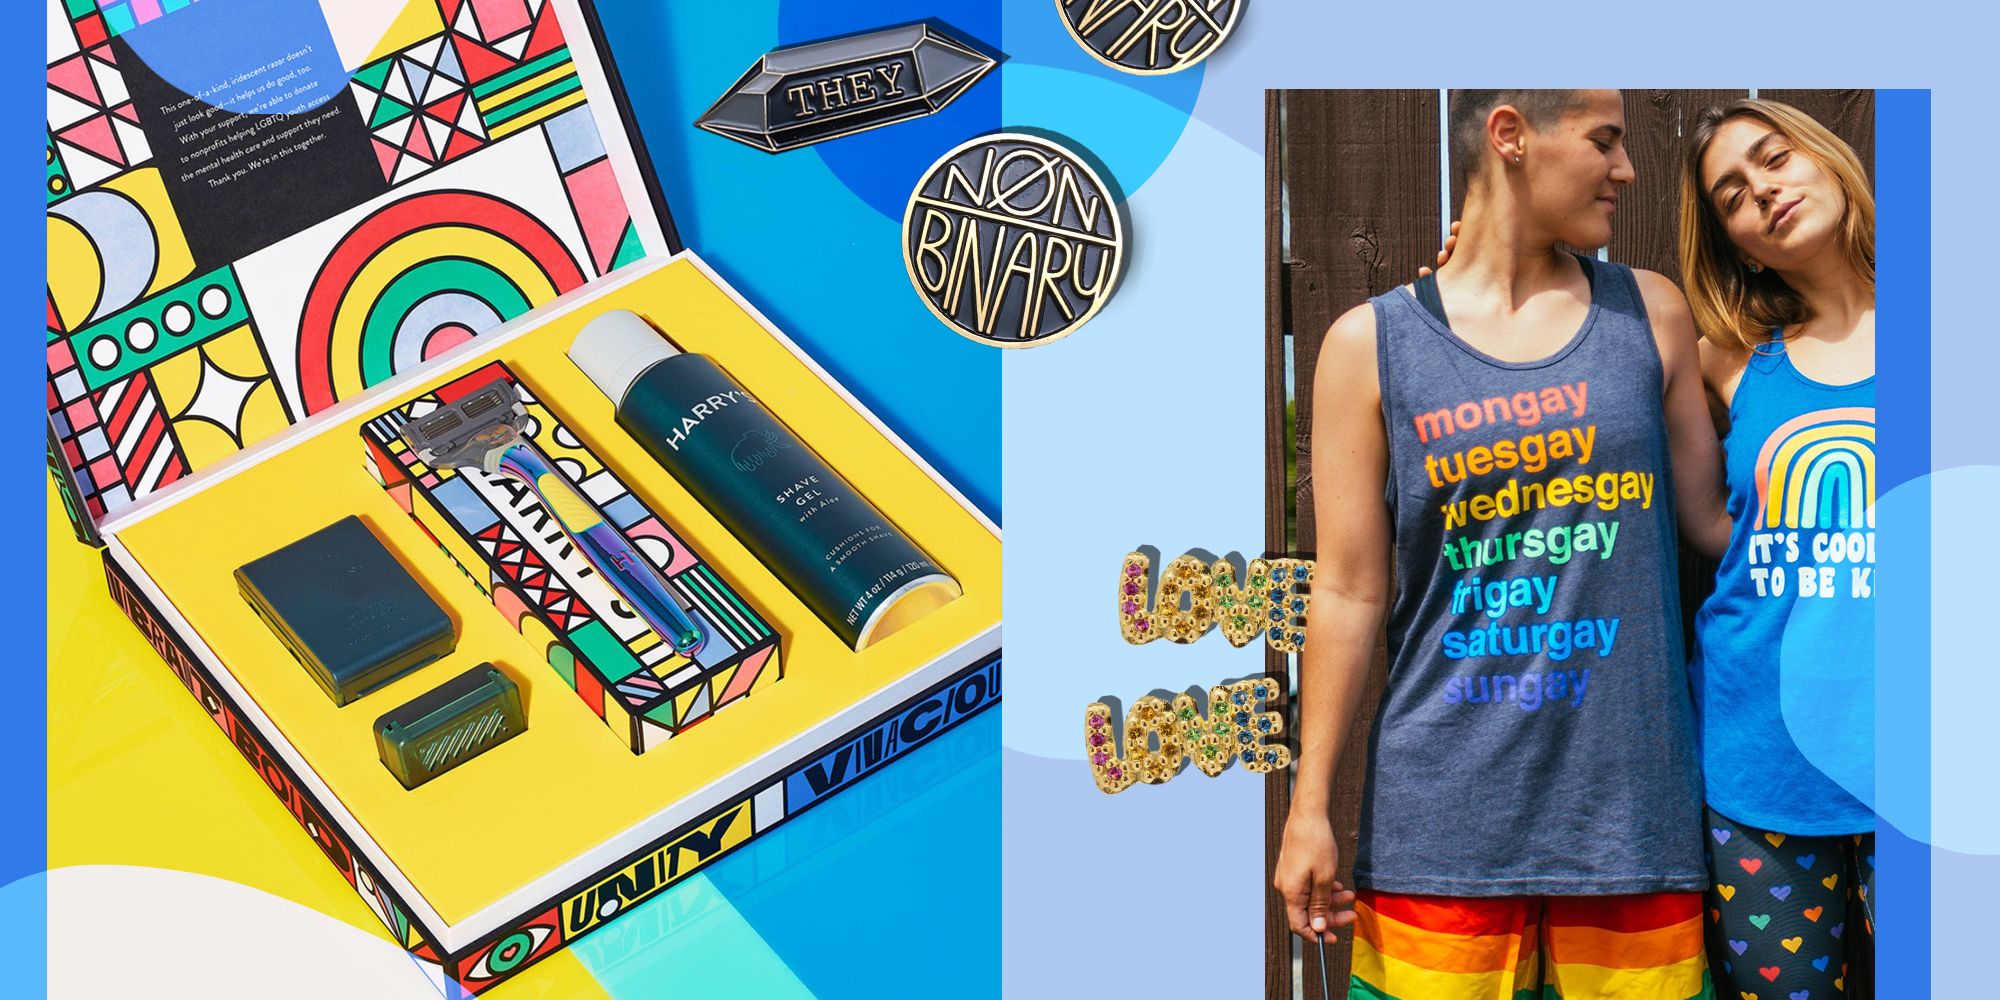 gay pride clothing and accessories